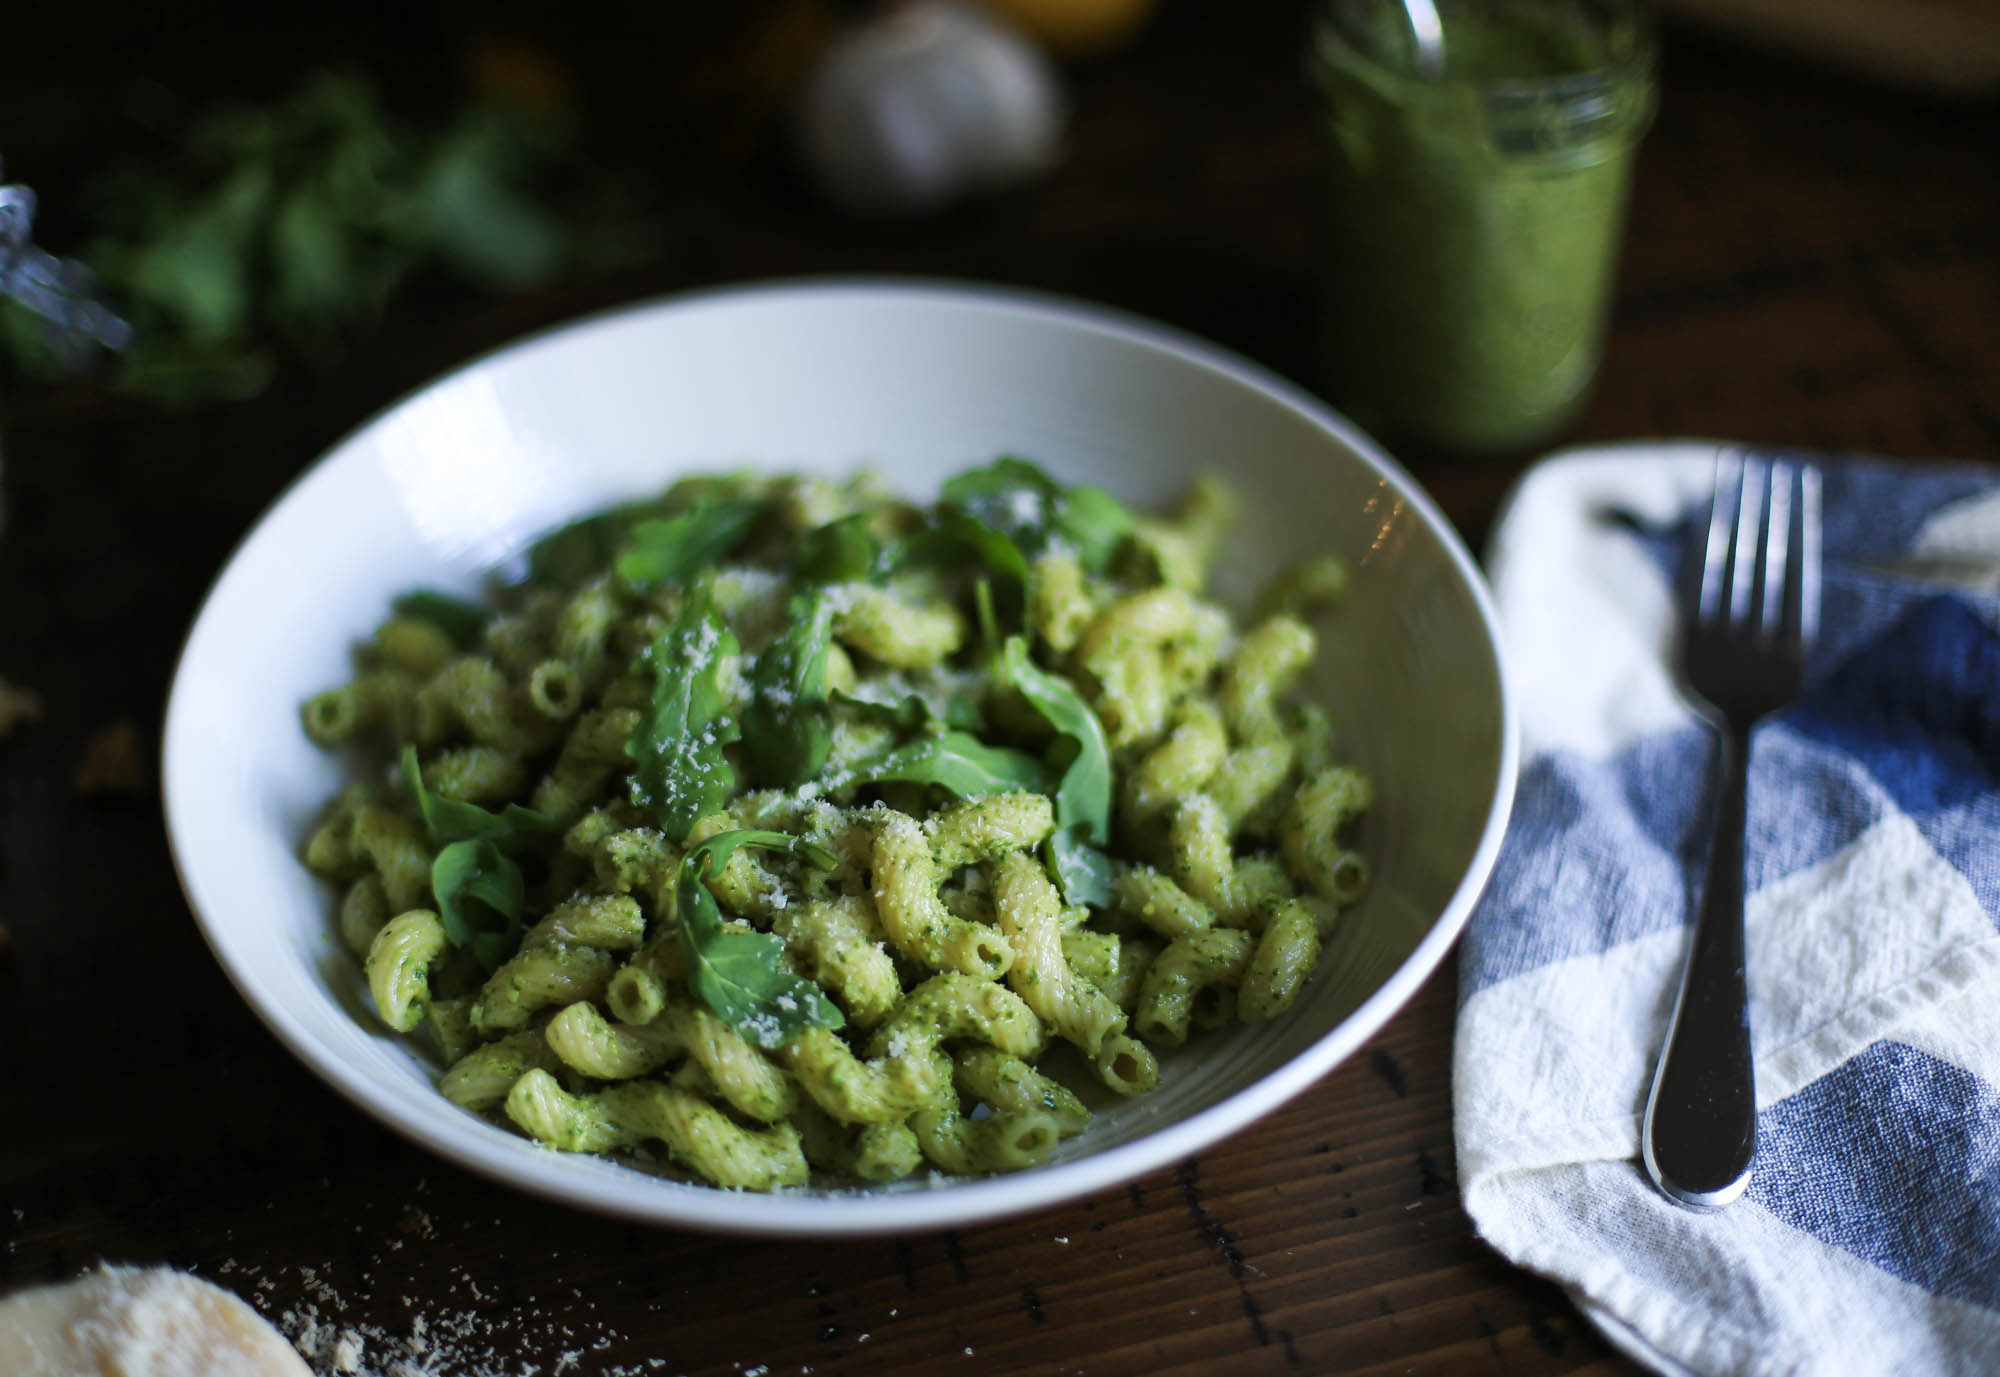 How to Make Pesto by The District Table